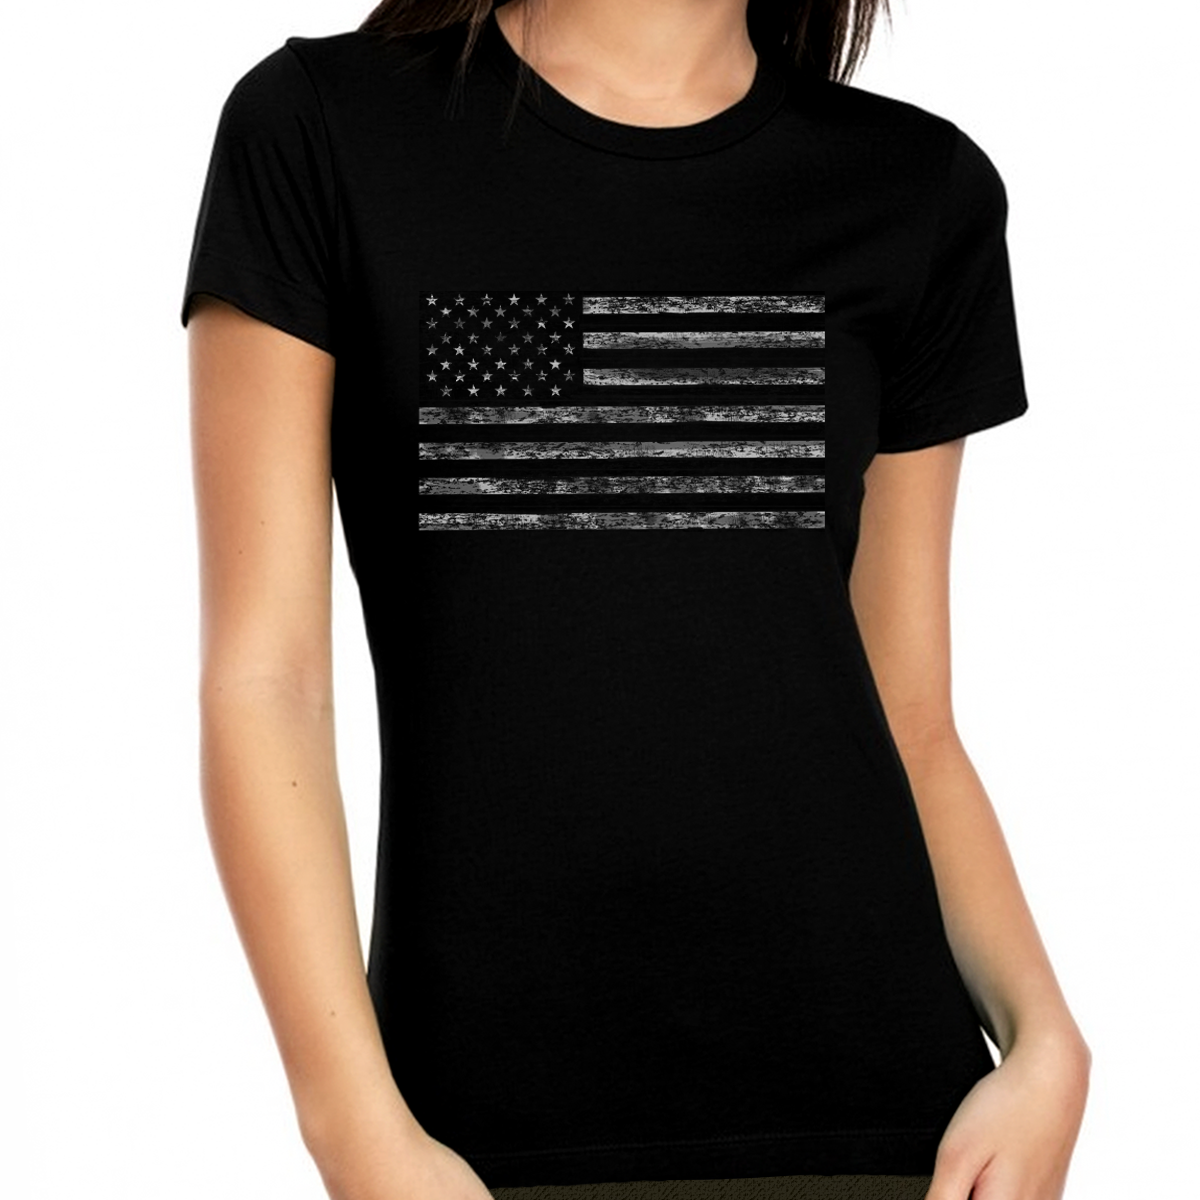 Distressed American Flag Shirt for Women Black Flag 4th of July Shirts USA for Women Patriotic Shirts - Fire Fit Designs